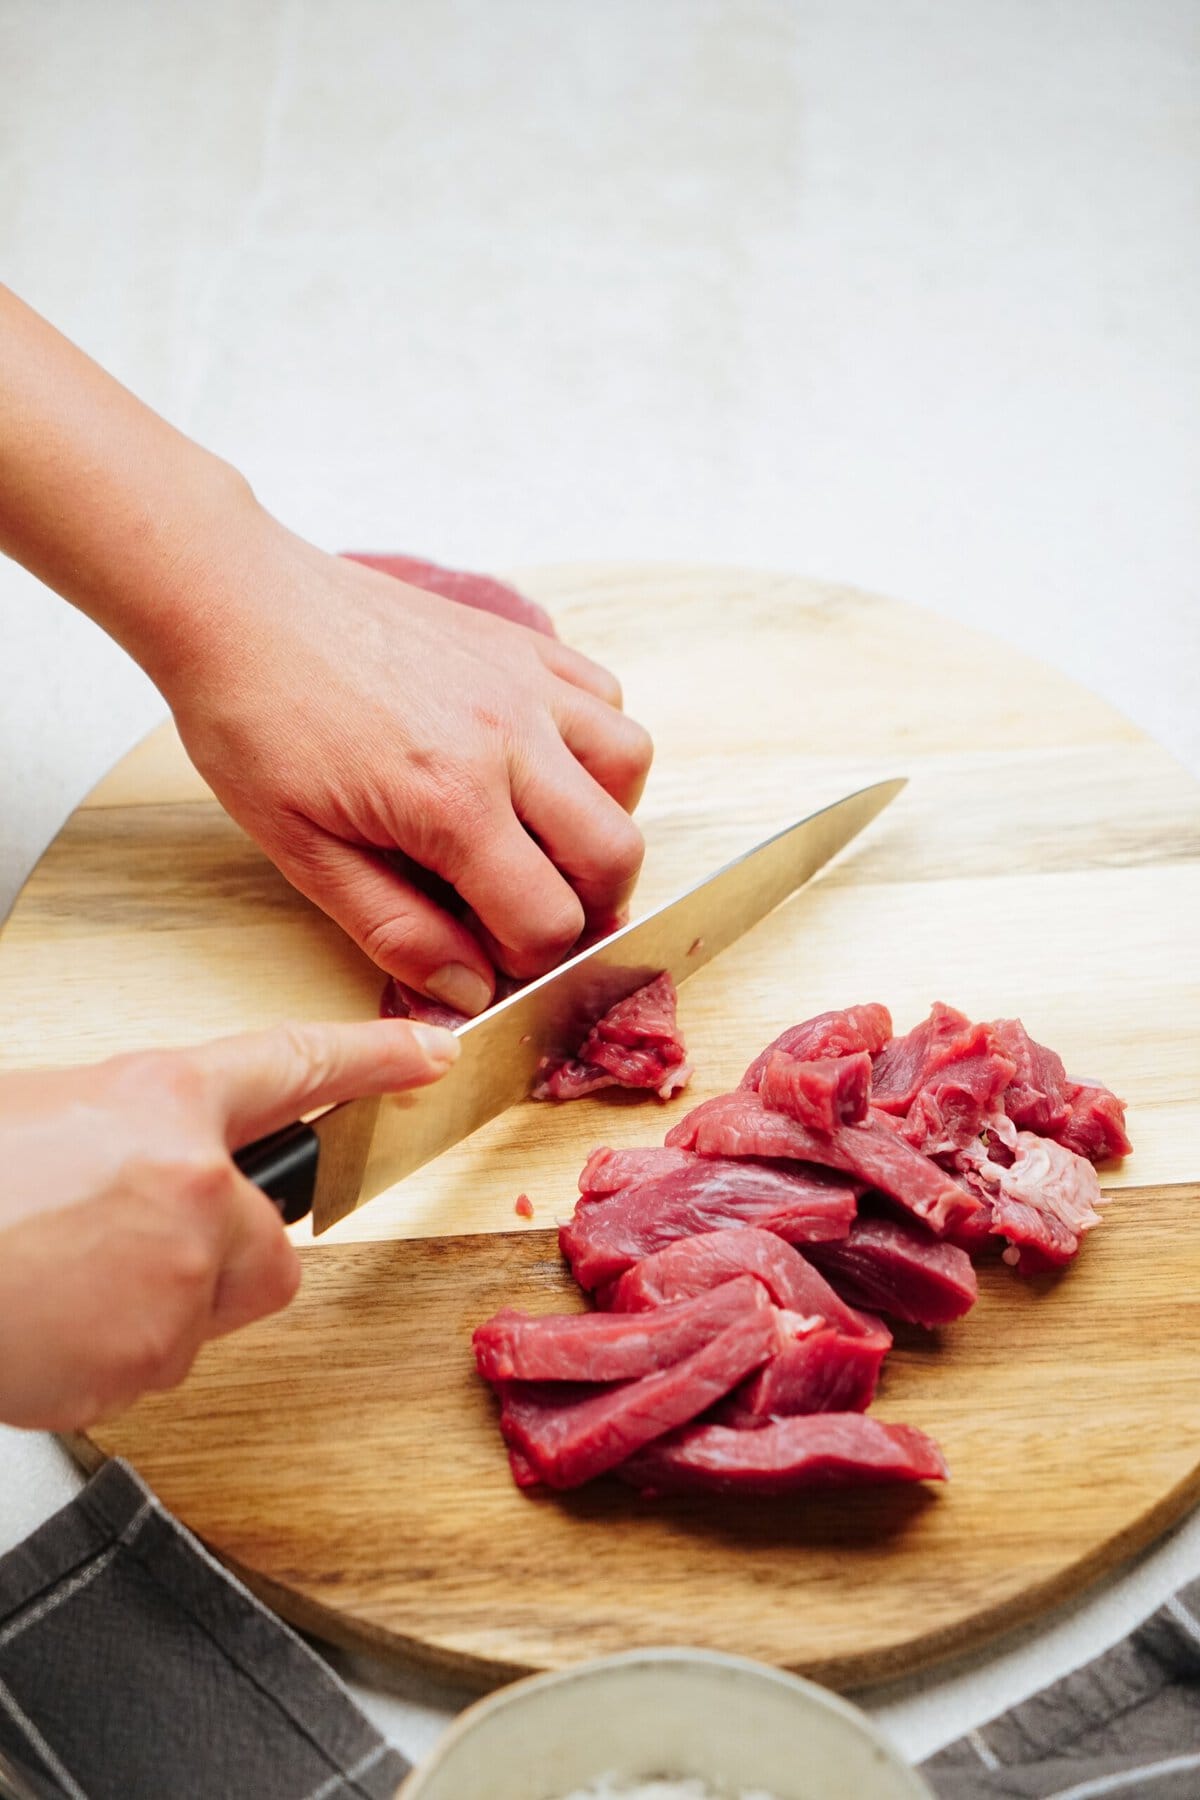 Close-up of a person slicing raw meat on a round wooden cutting board with a knife. A pile of sliced meat is also visible on the board.